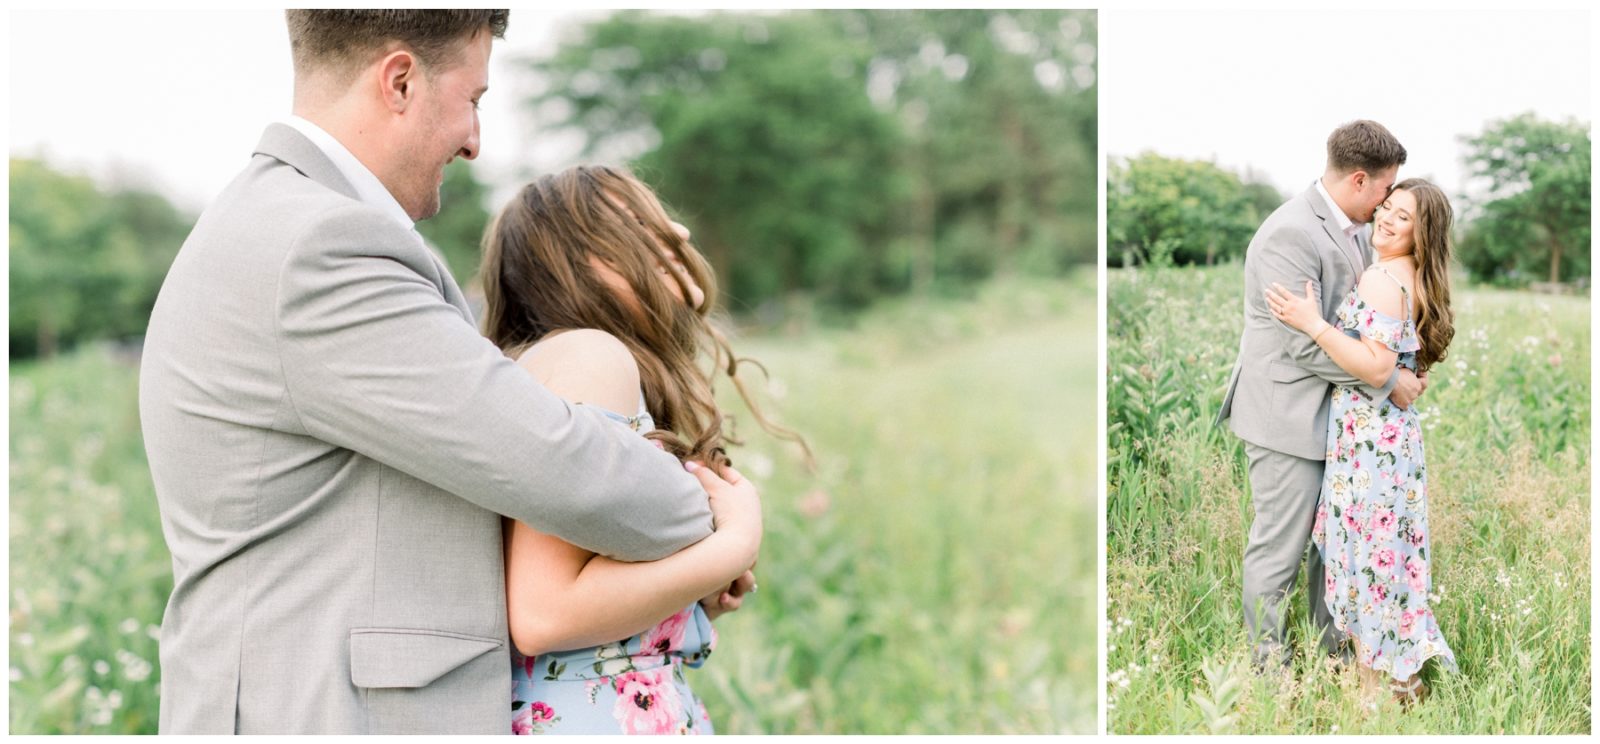 Roseville Engagement Session in a park during the Summer